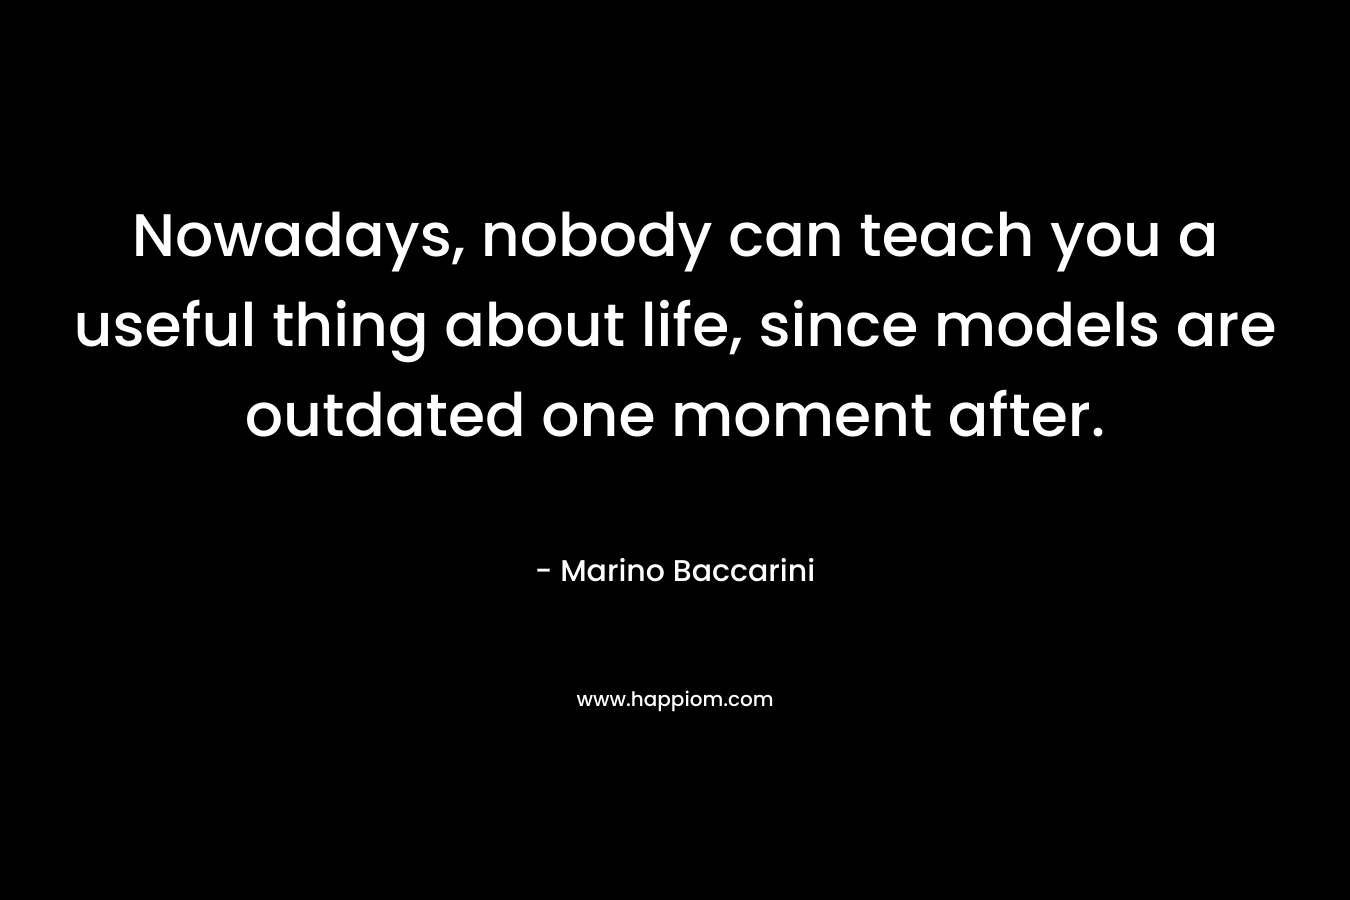 Nowadays, nobody can teach you a useful thing about life, since models are outdated one moment after. – Marino Baccarini